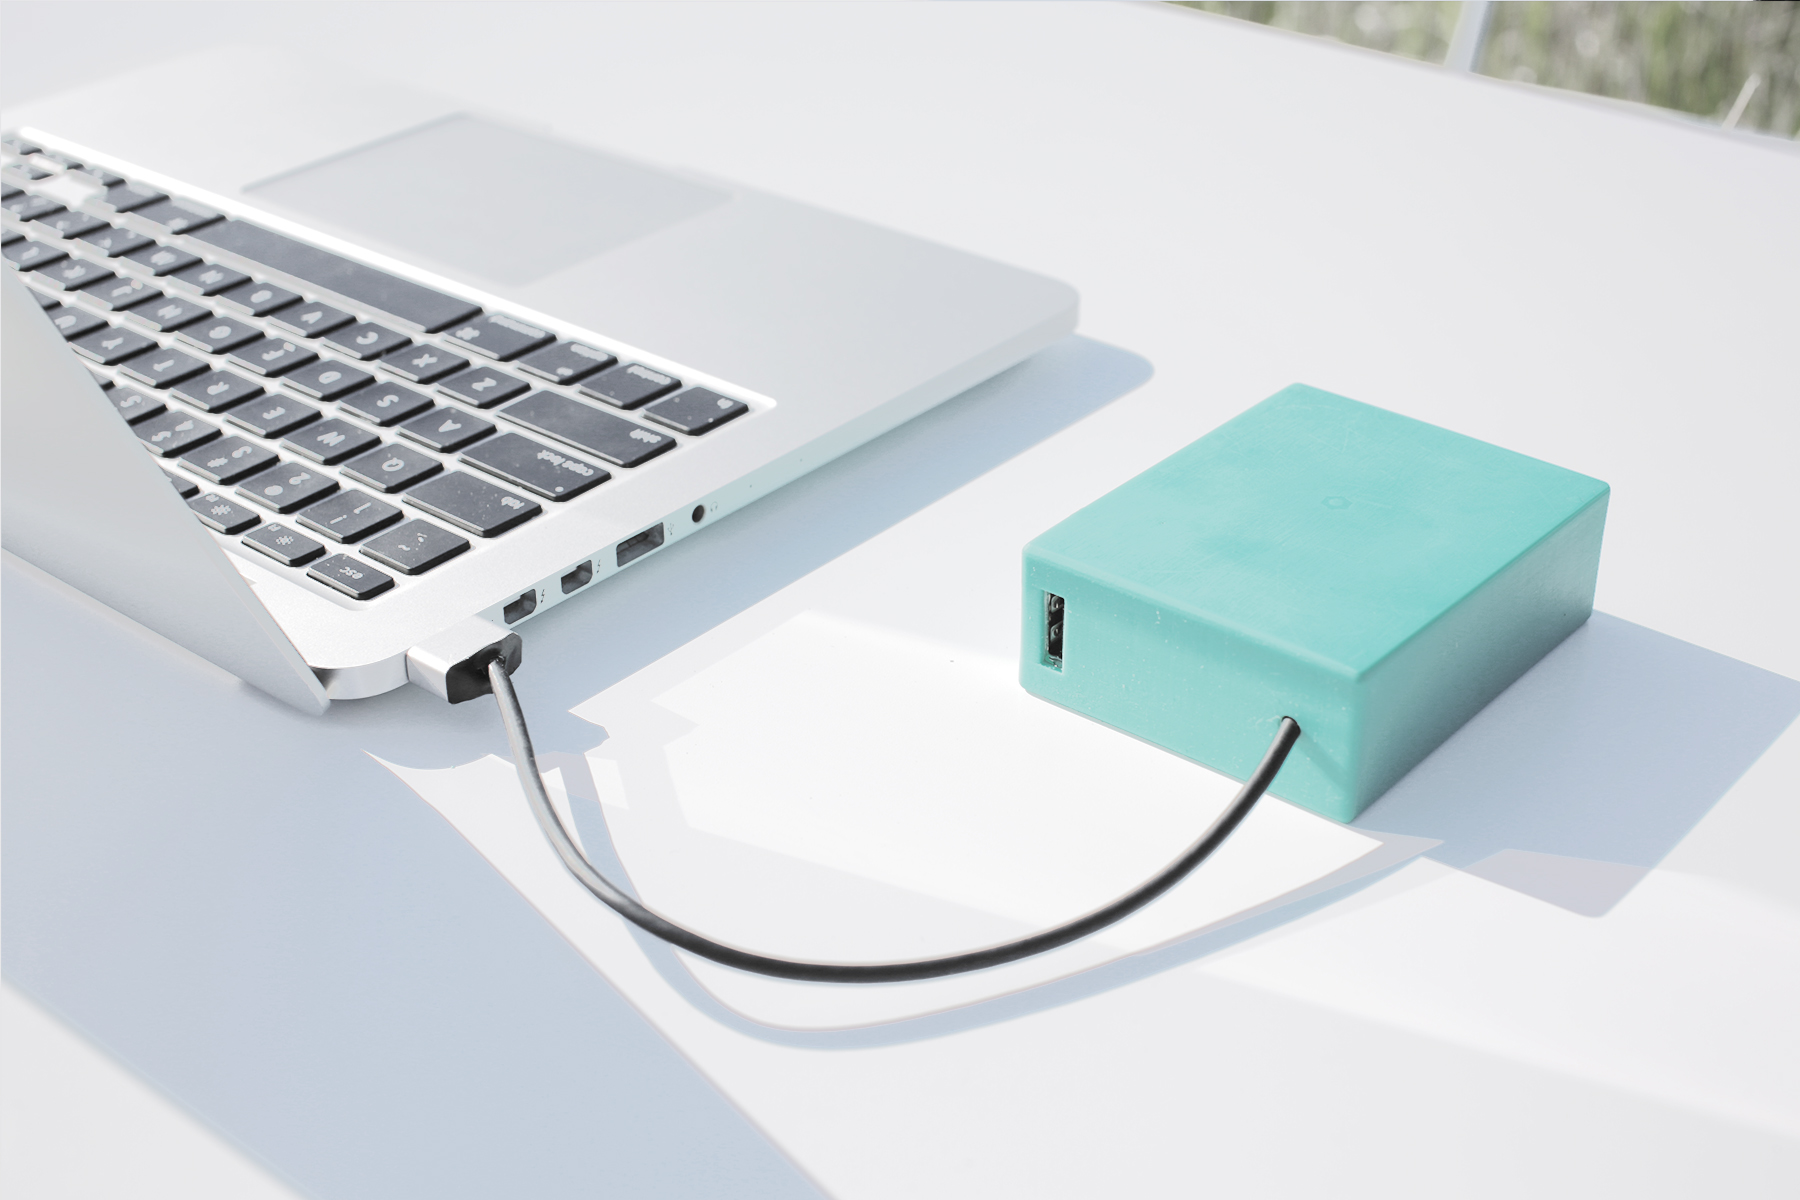 BatteryBox is a great accessory for anyone who needs to recharge devices anywhere